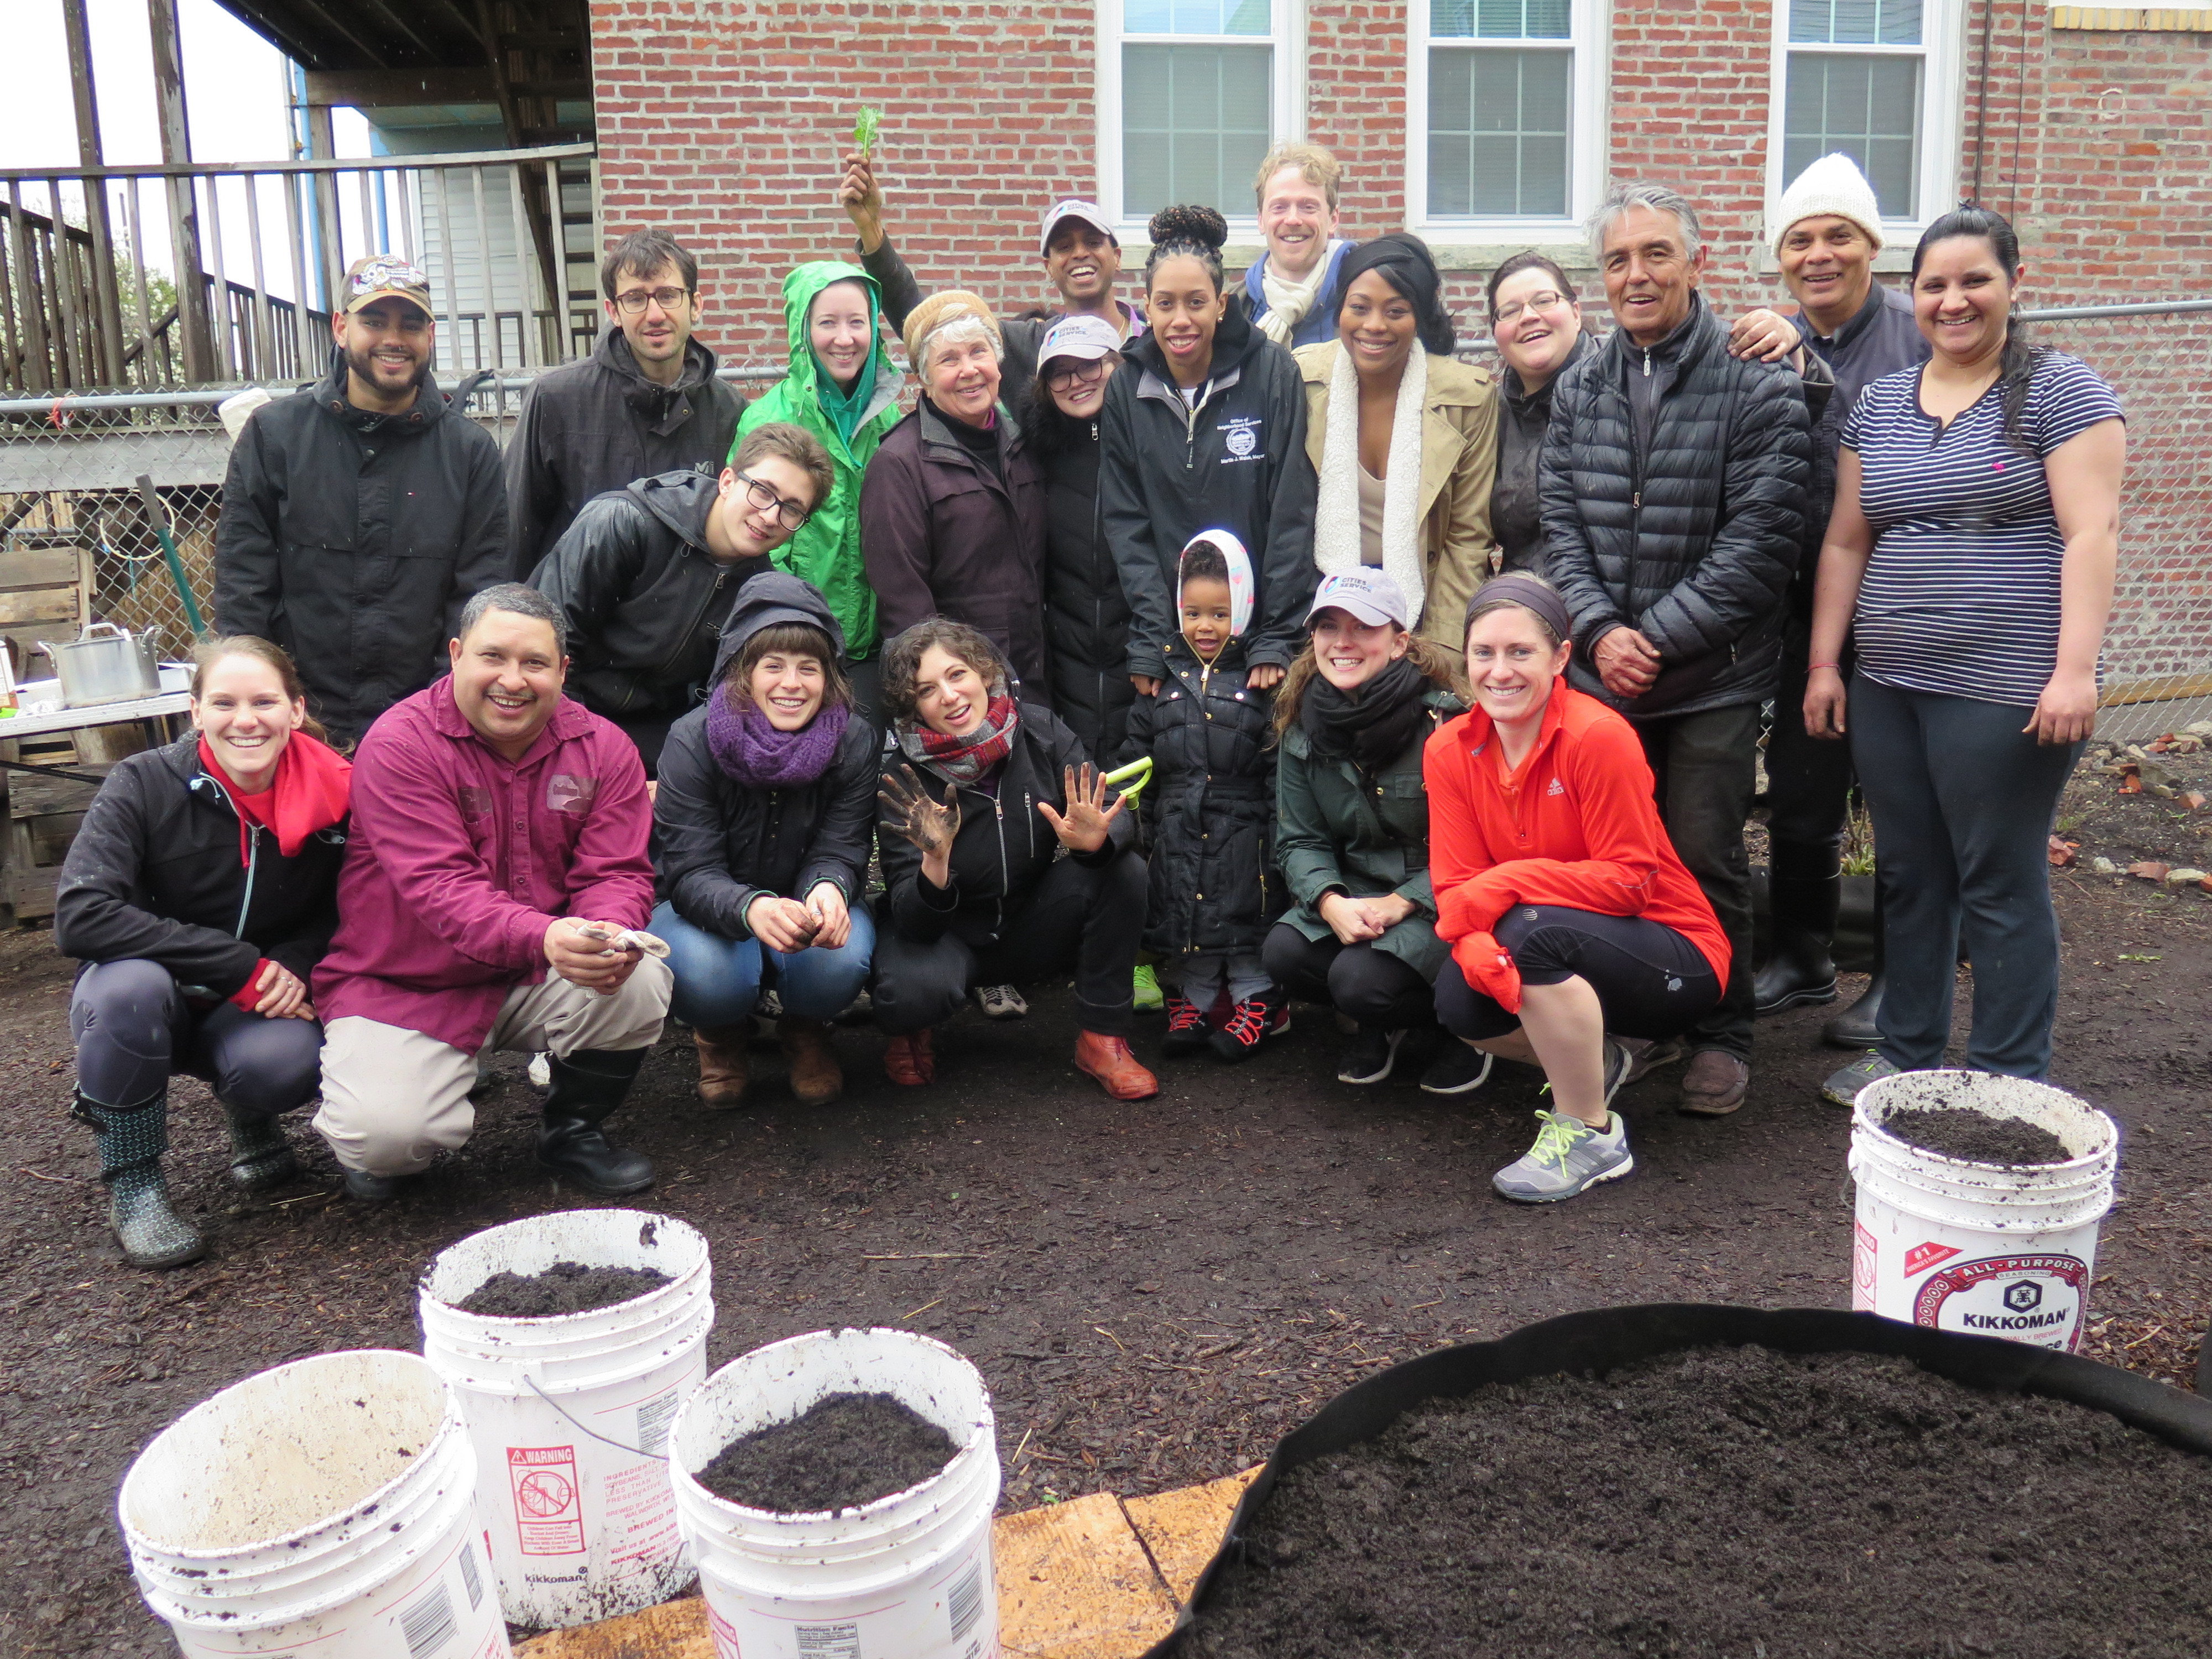 East Boston residents at Eastie Farm participate in an Earth Day work day and kick off the growing season.